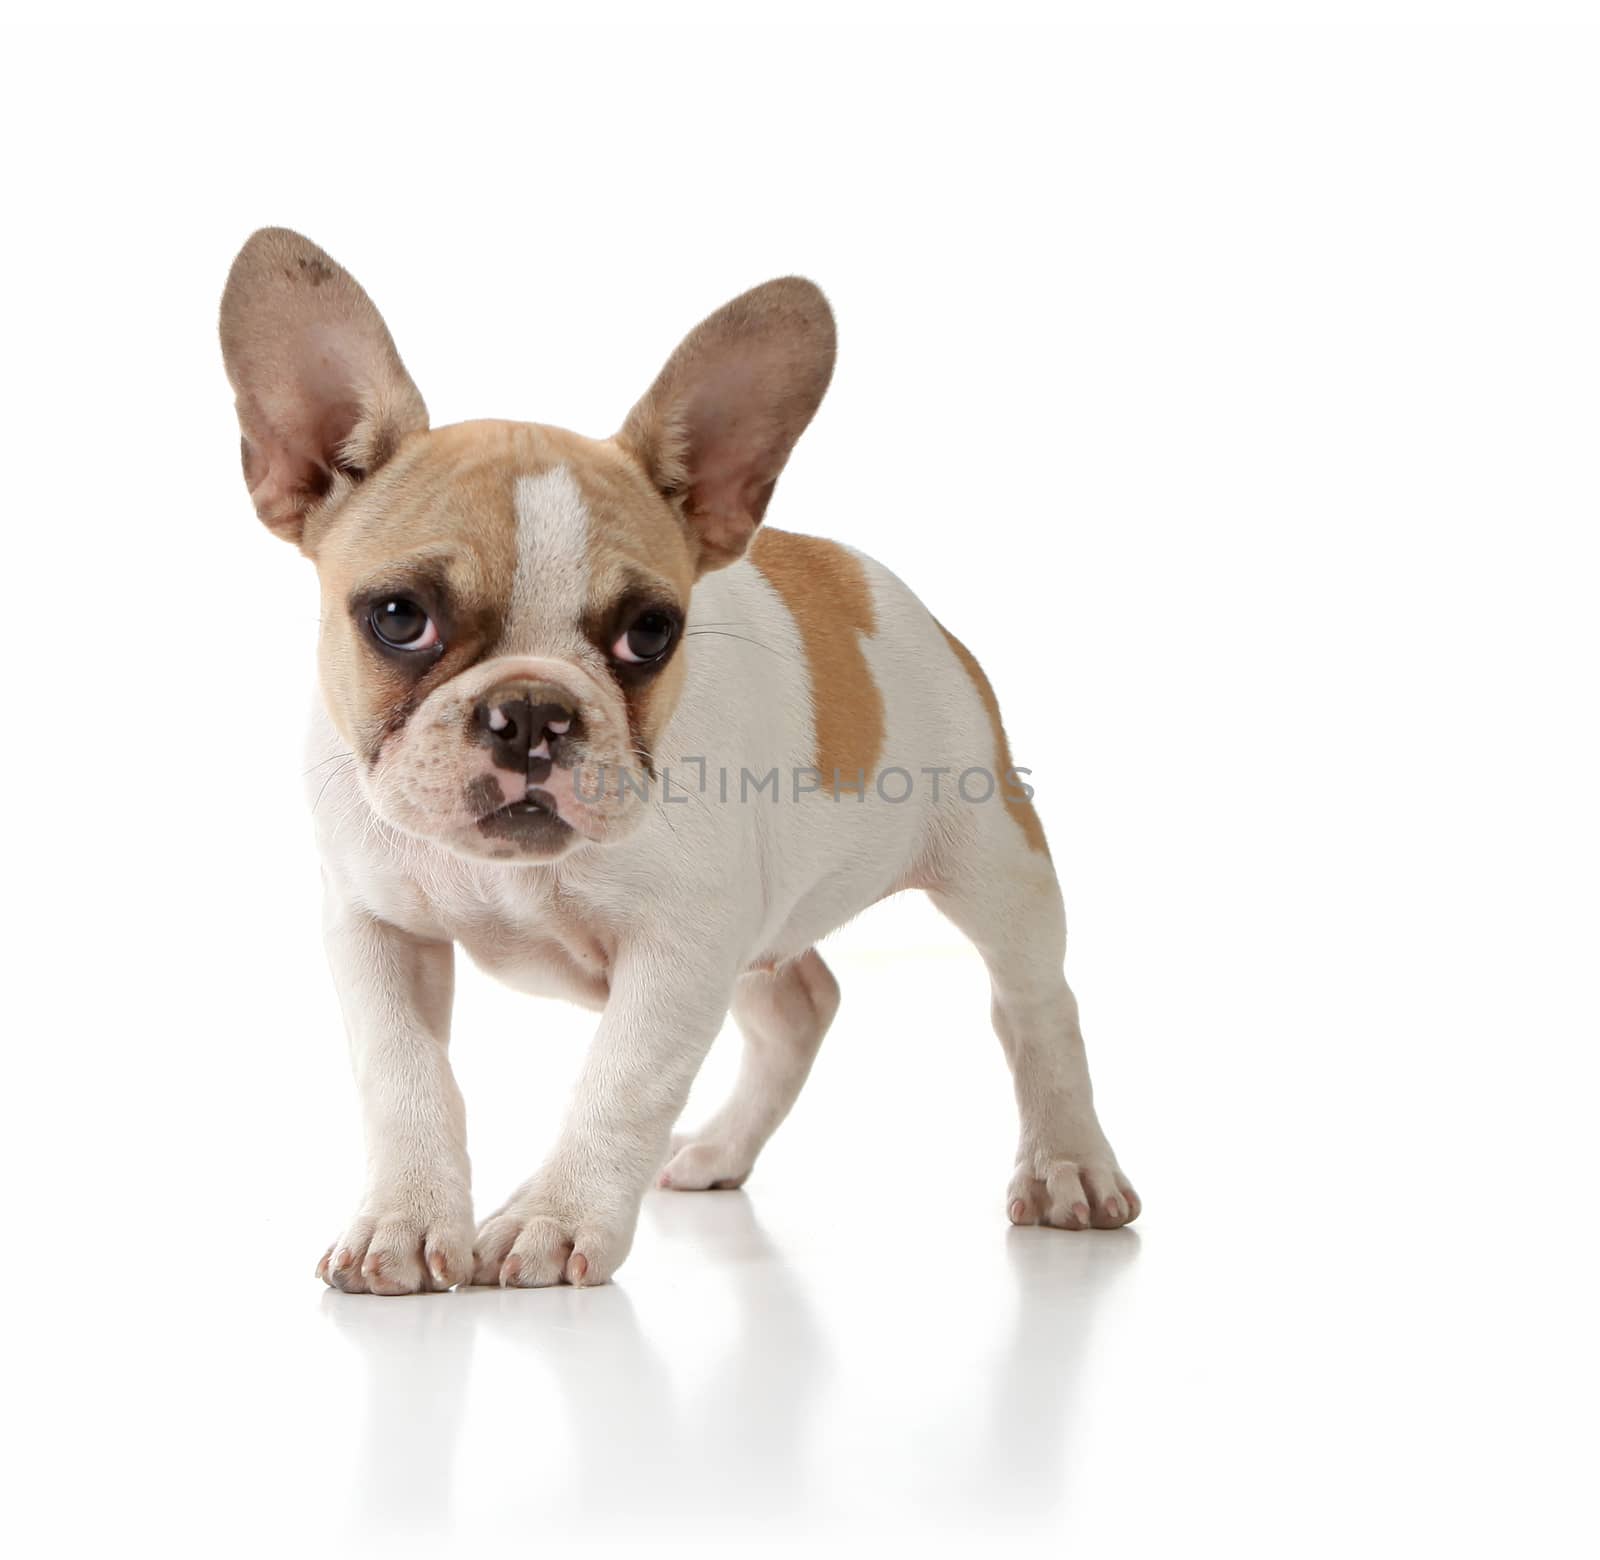 Innocent Puppy Dog Looking Lonely on White Background by tobkatrina